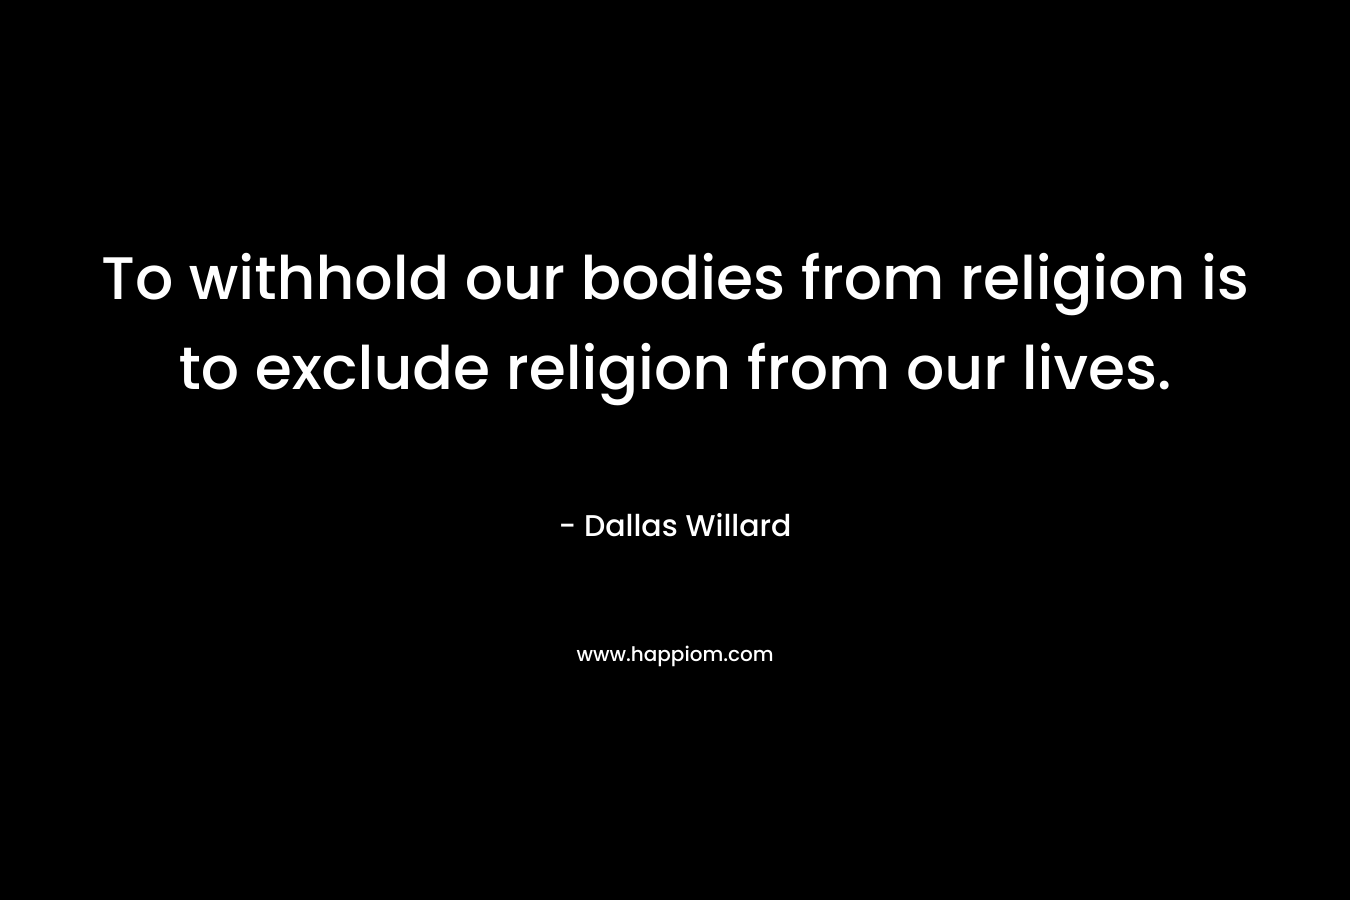 To withhold our bodies from religion is to exclude religion from our lives. – Dallas Willard